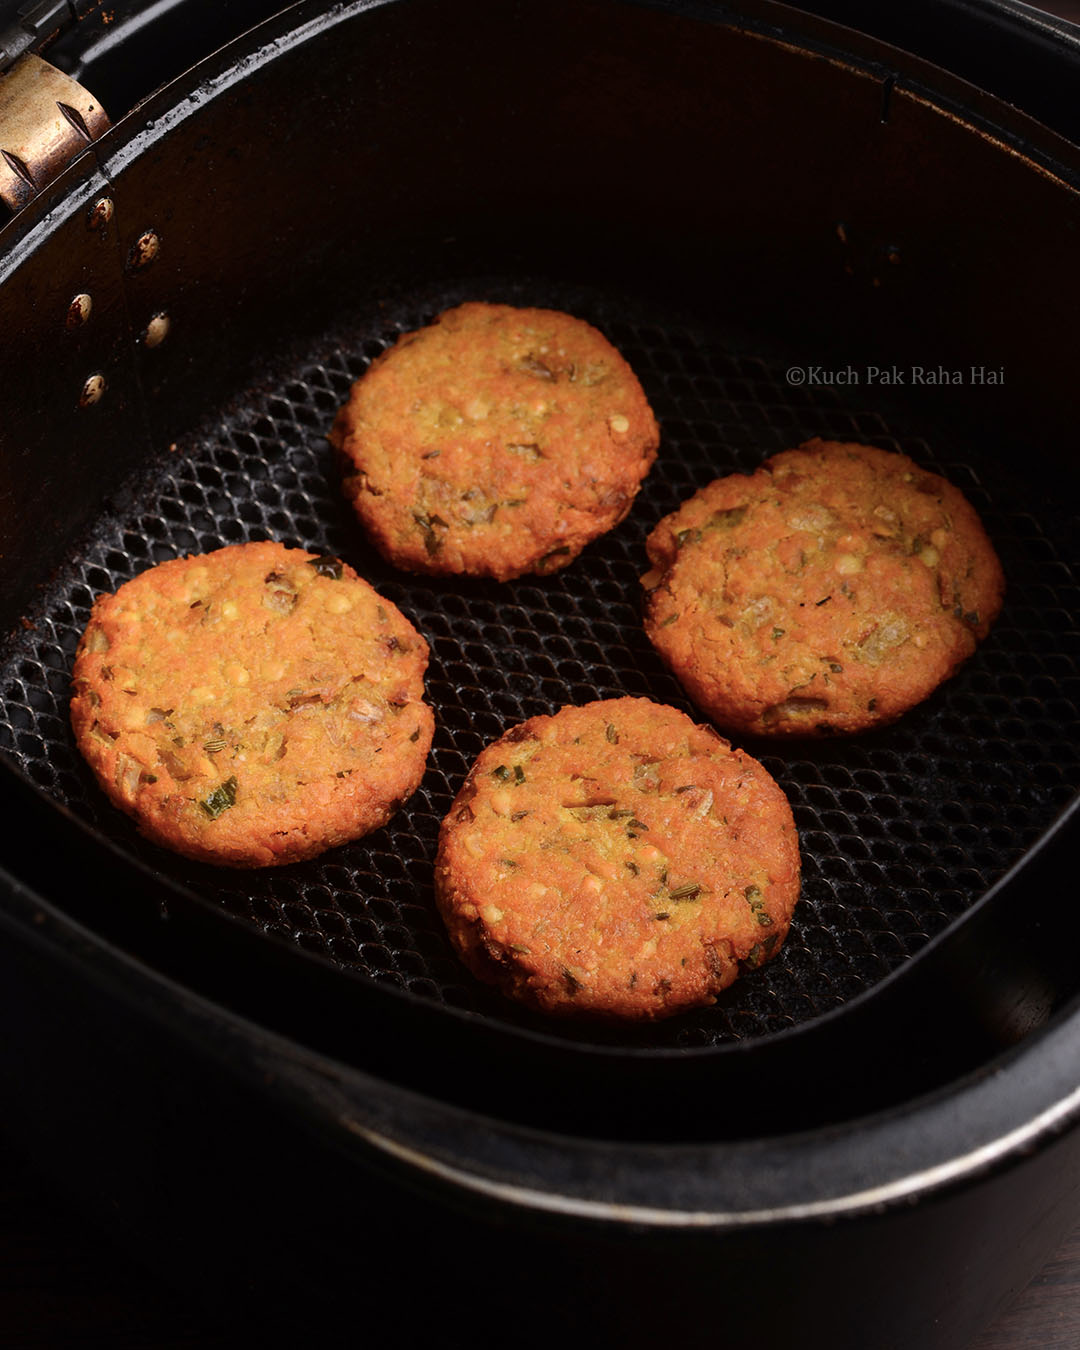 Vegan gluten free red lentil fritters cooked in air fryer.